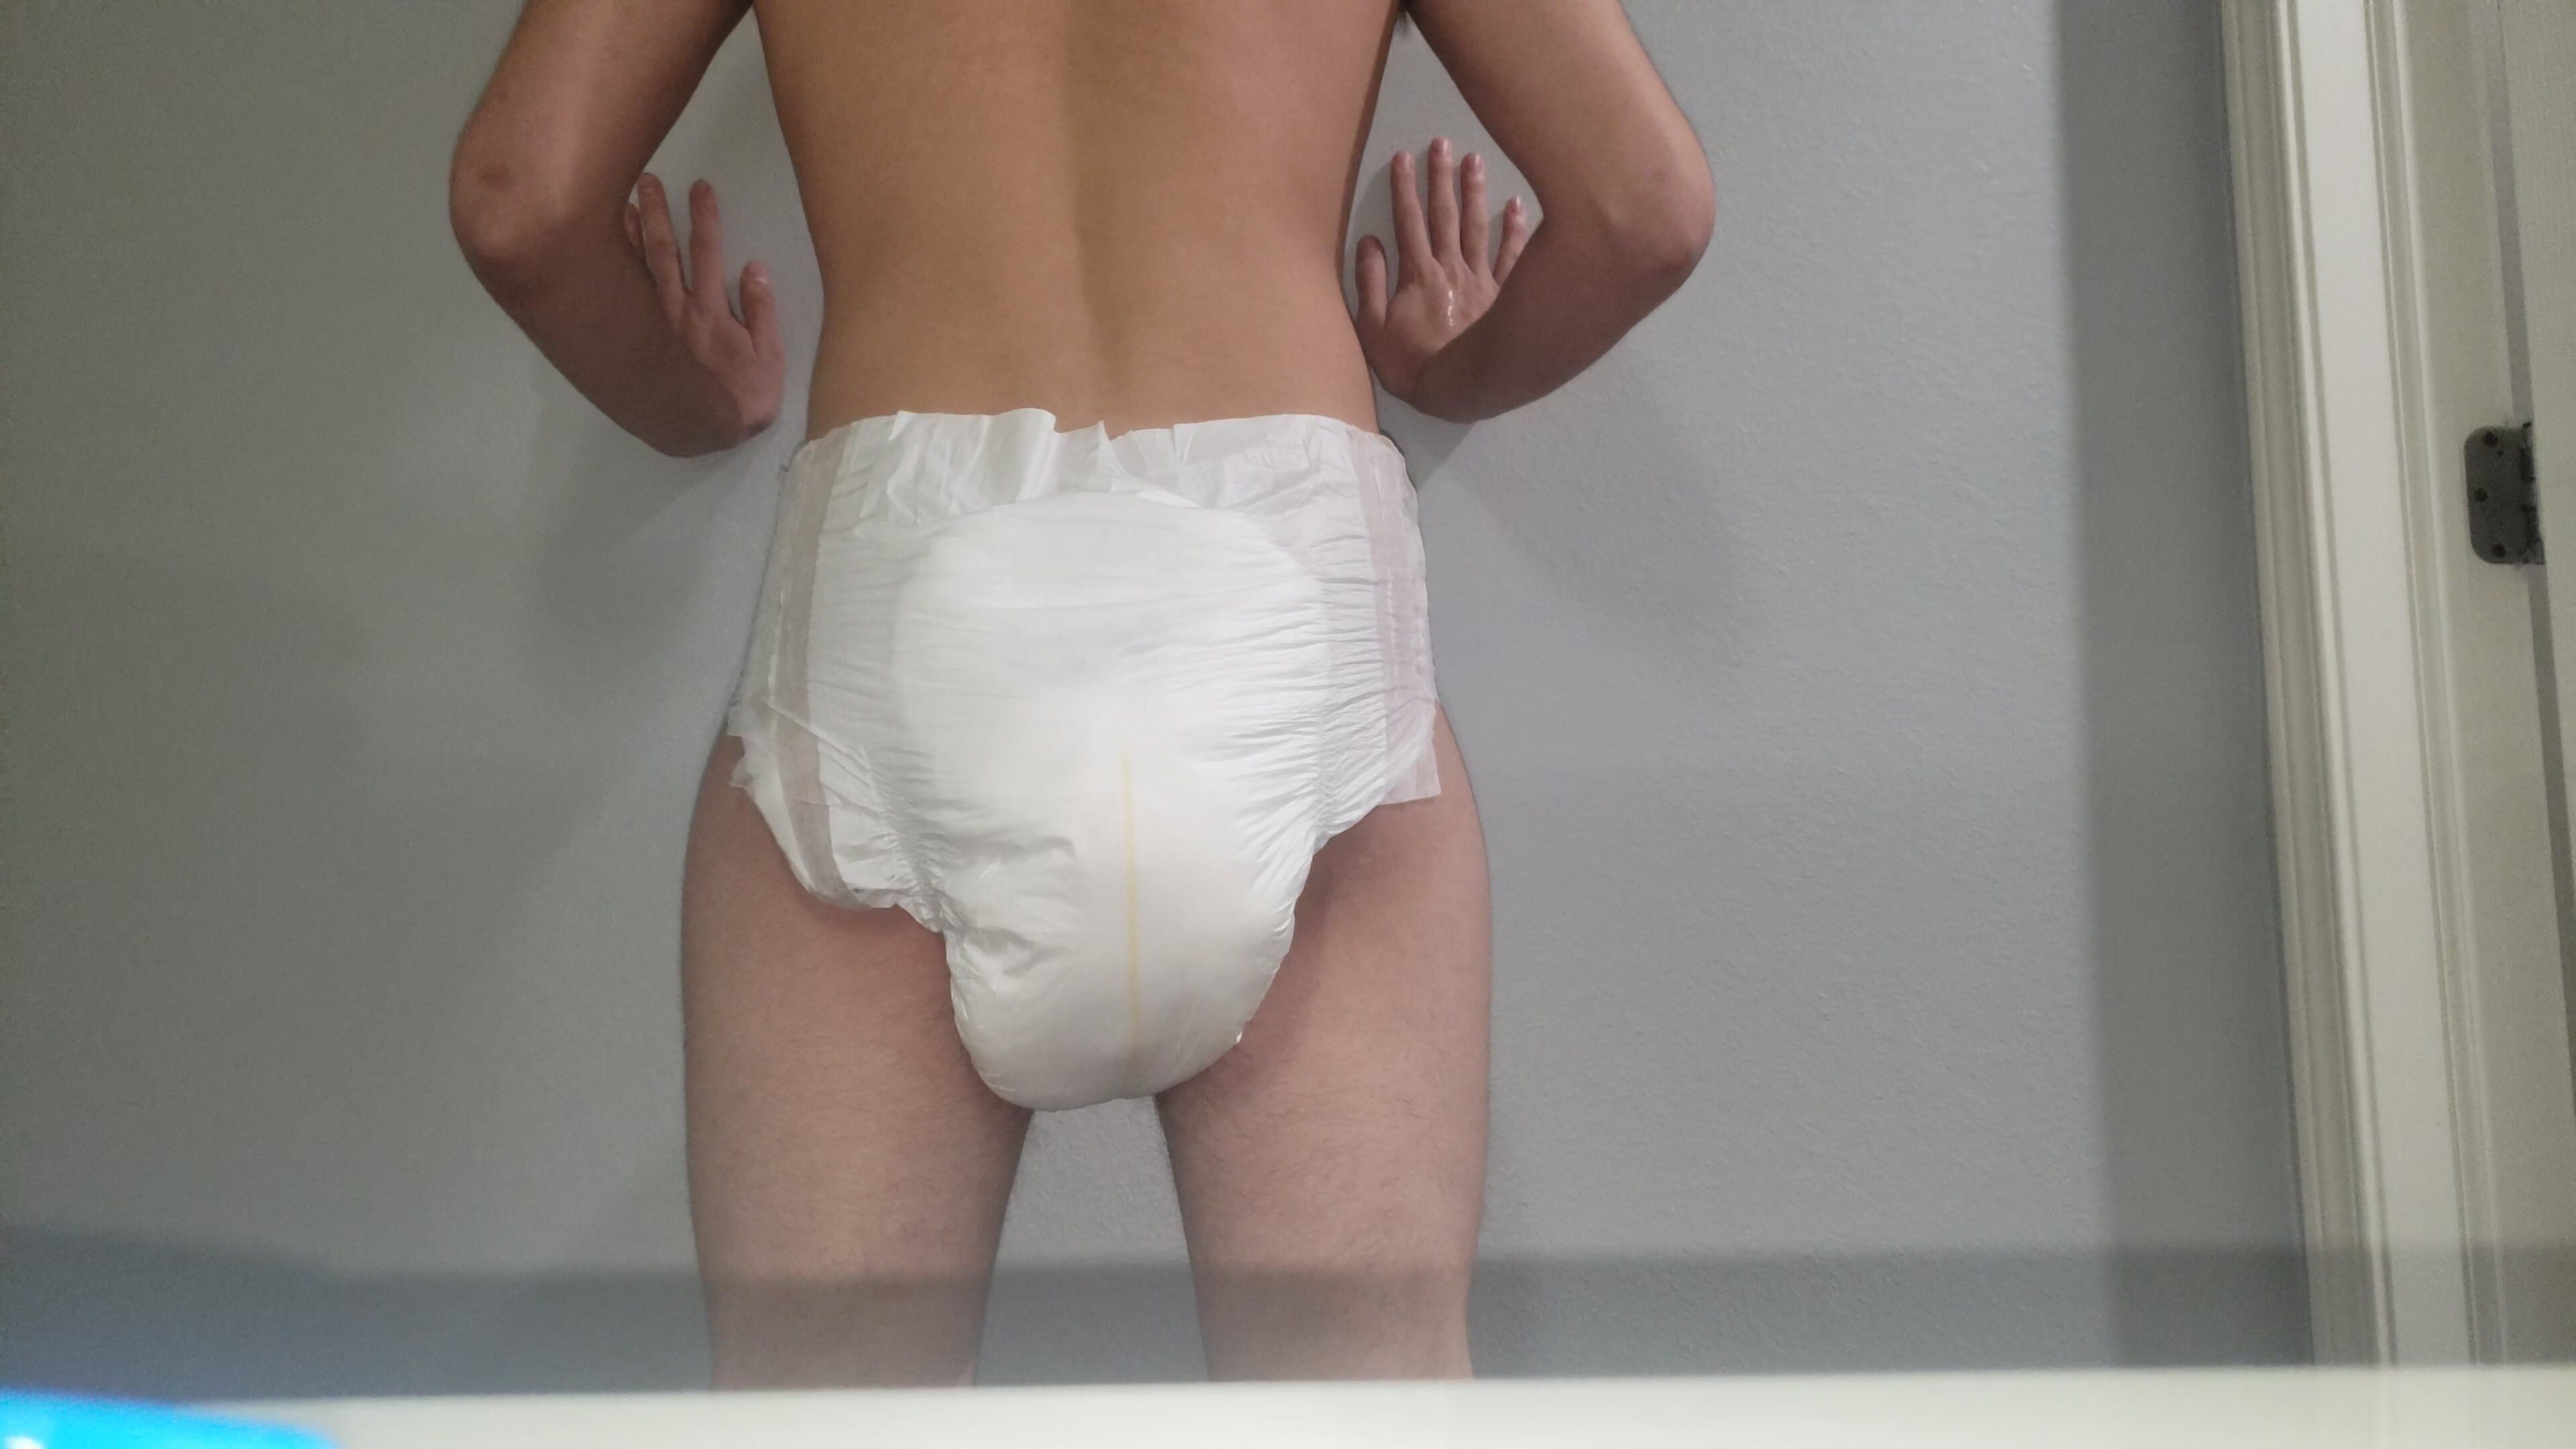 Pushing out my 5th load in a diaper with 4 other poops